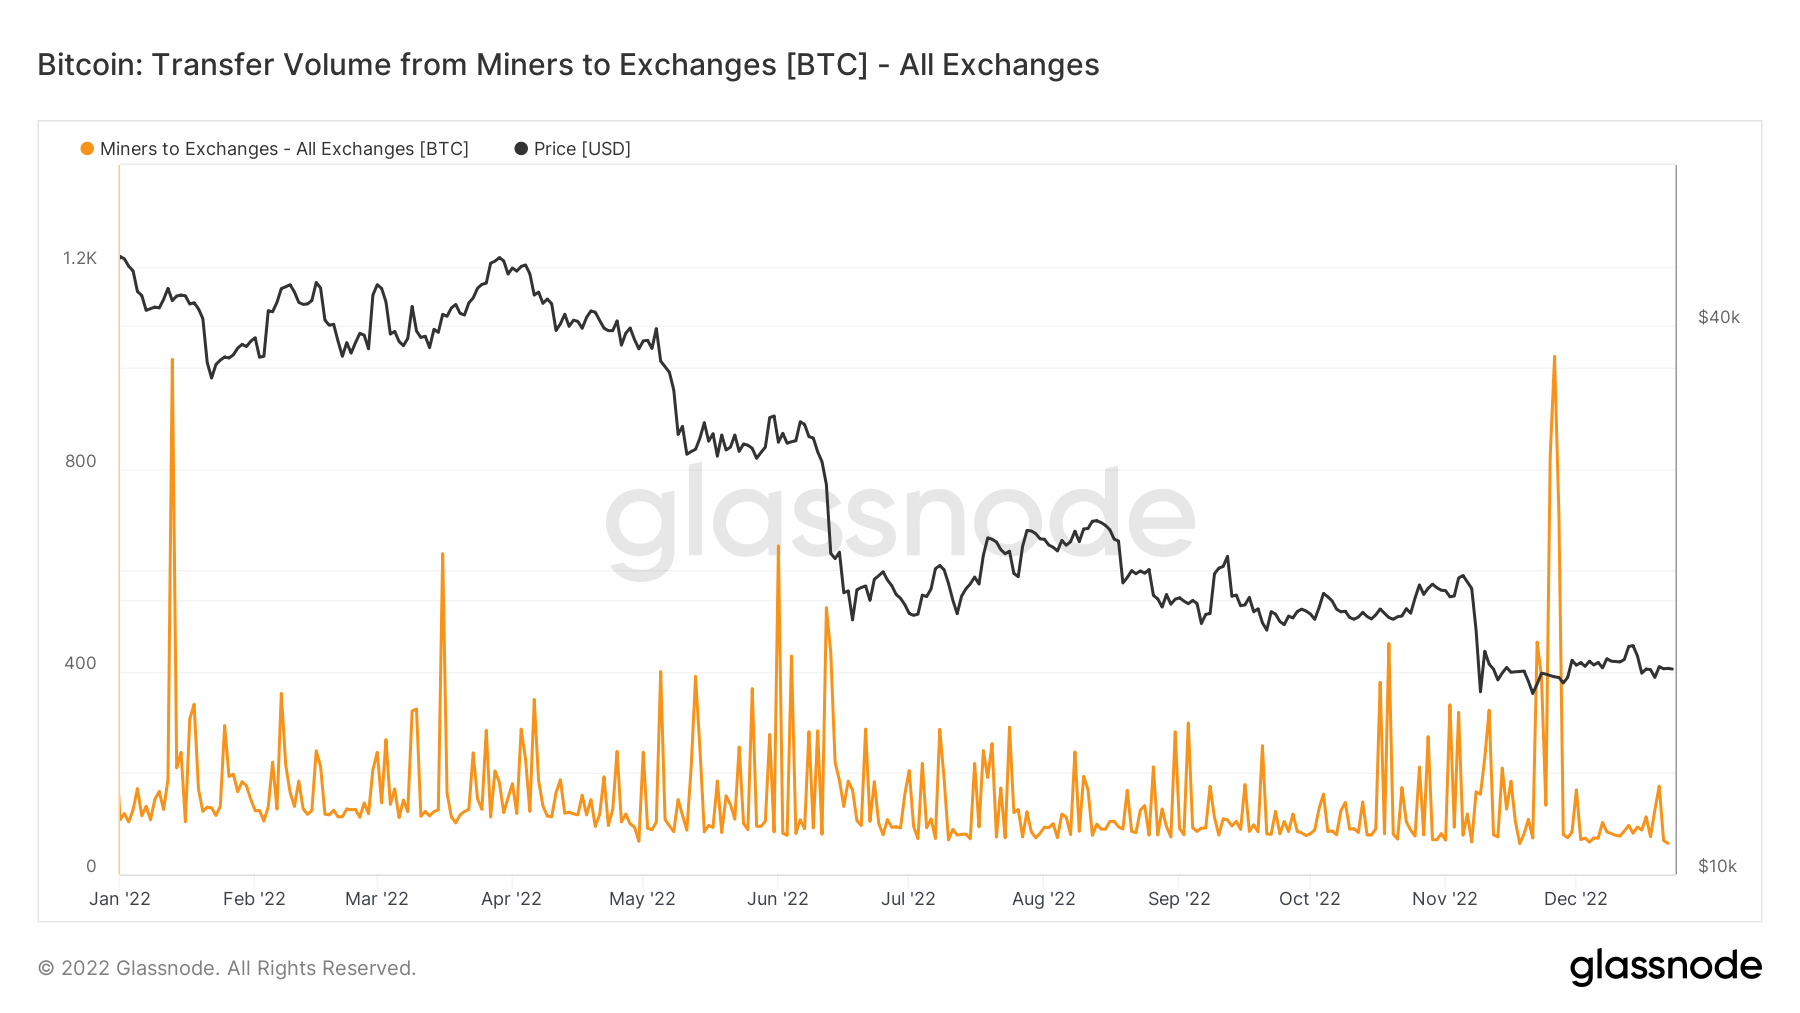 Bitcoin: Transfer Volume from Miners to Exchanges / Source: Glassnode